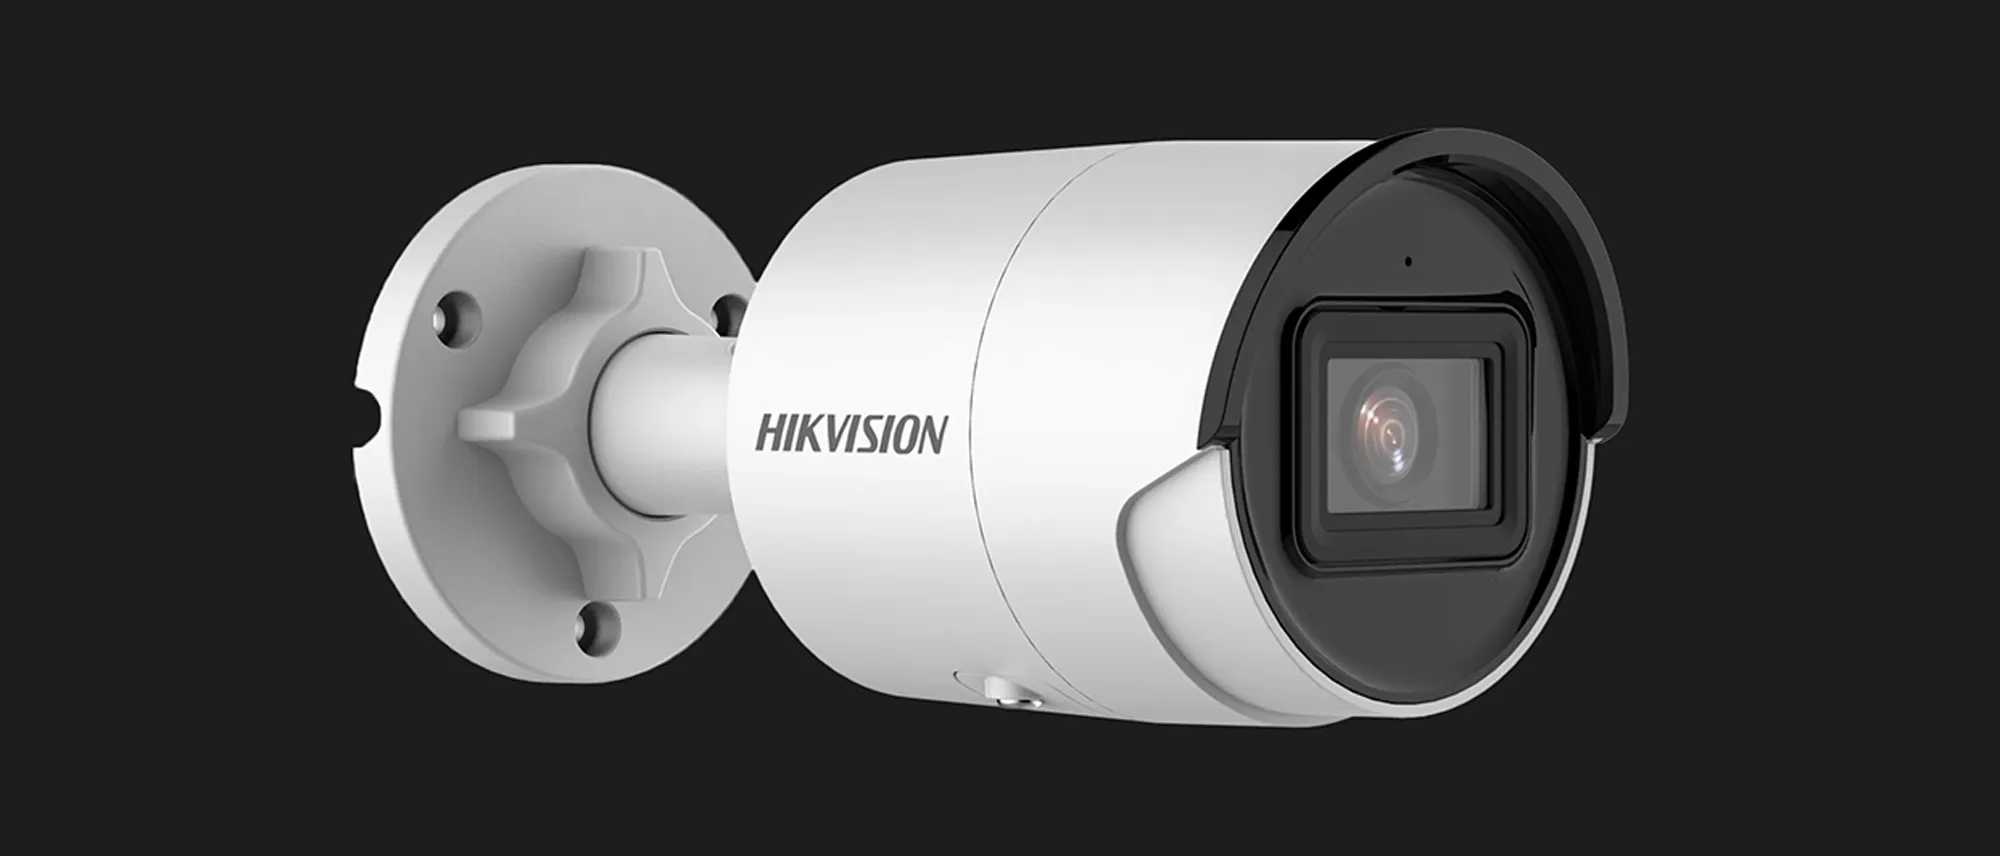 IP камера Hikvision DS-2CD2043G2-I (4мм)